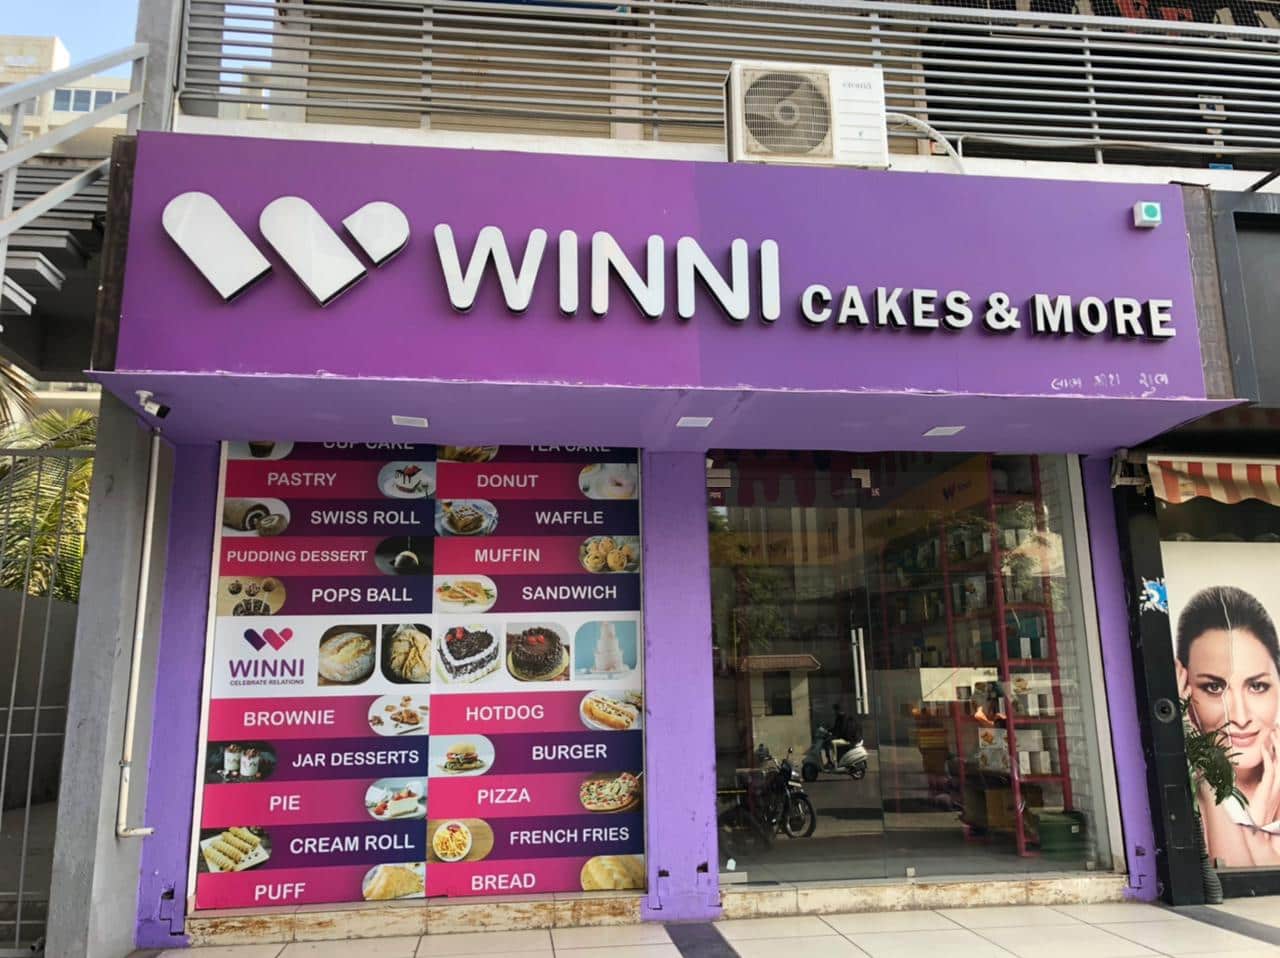 What is your review of Winni? - Quora